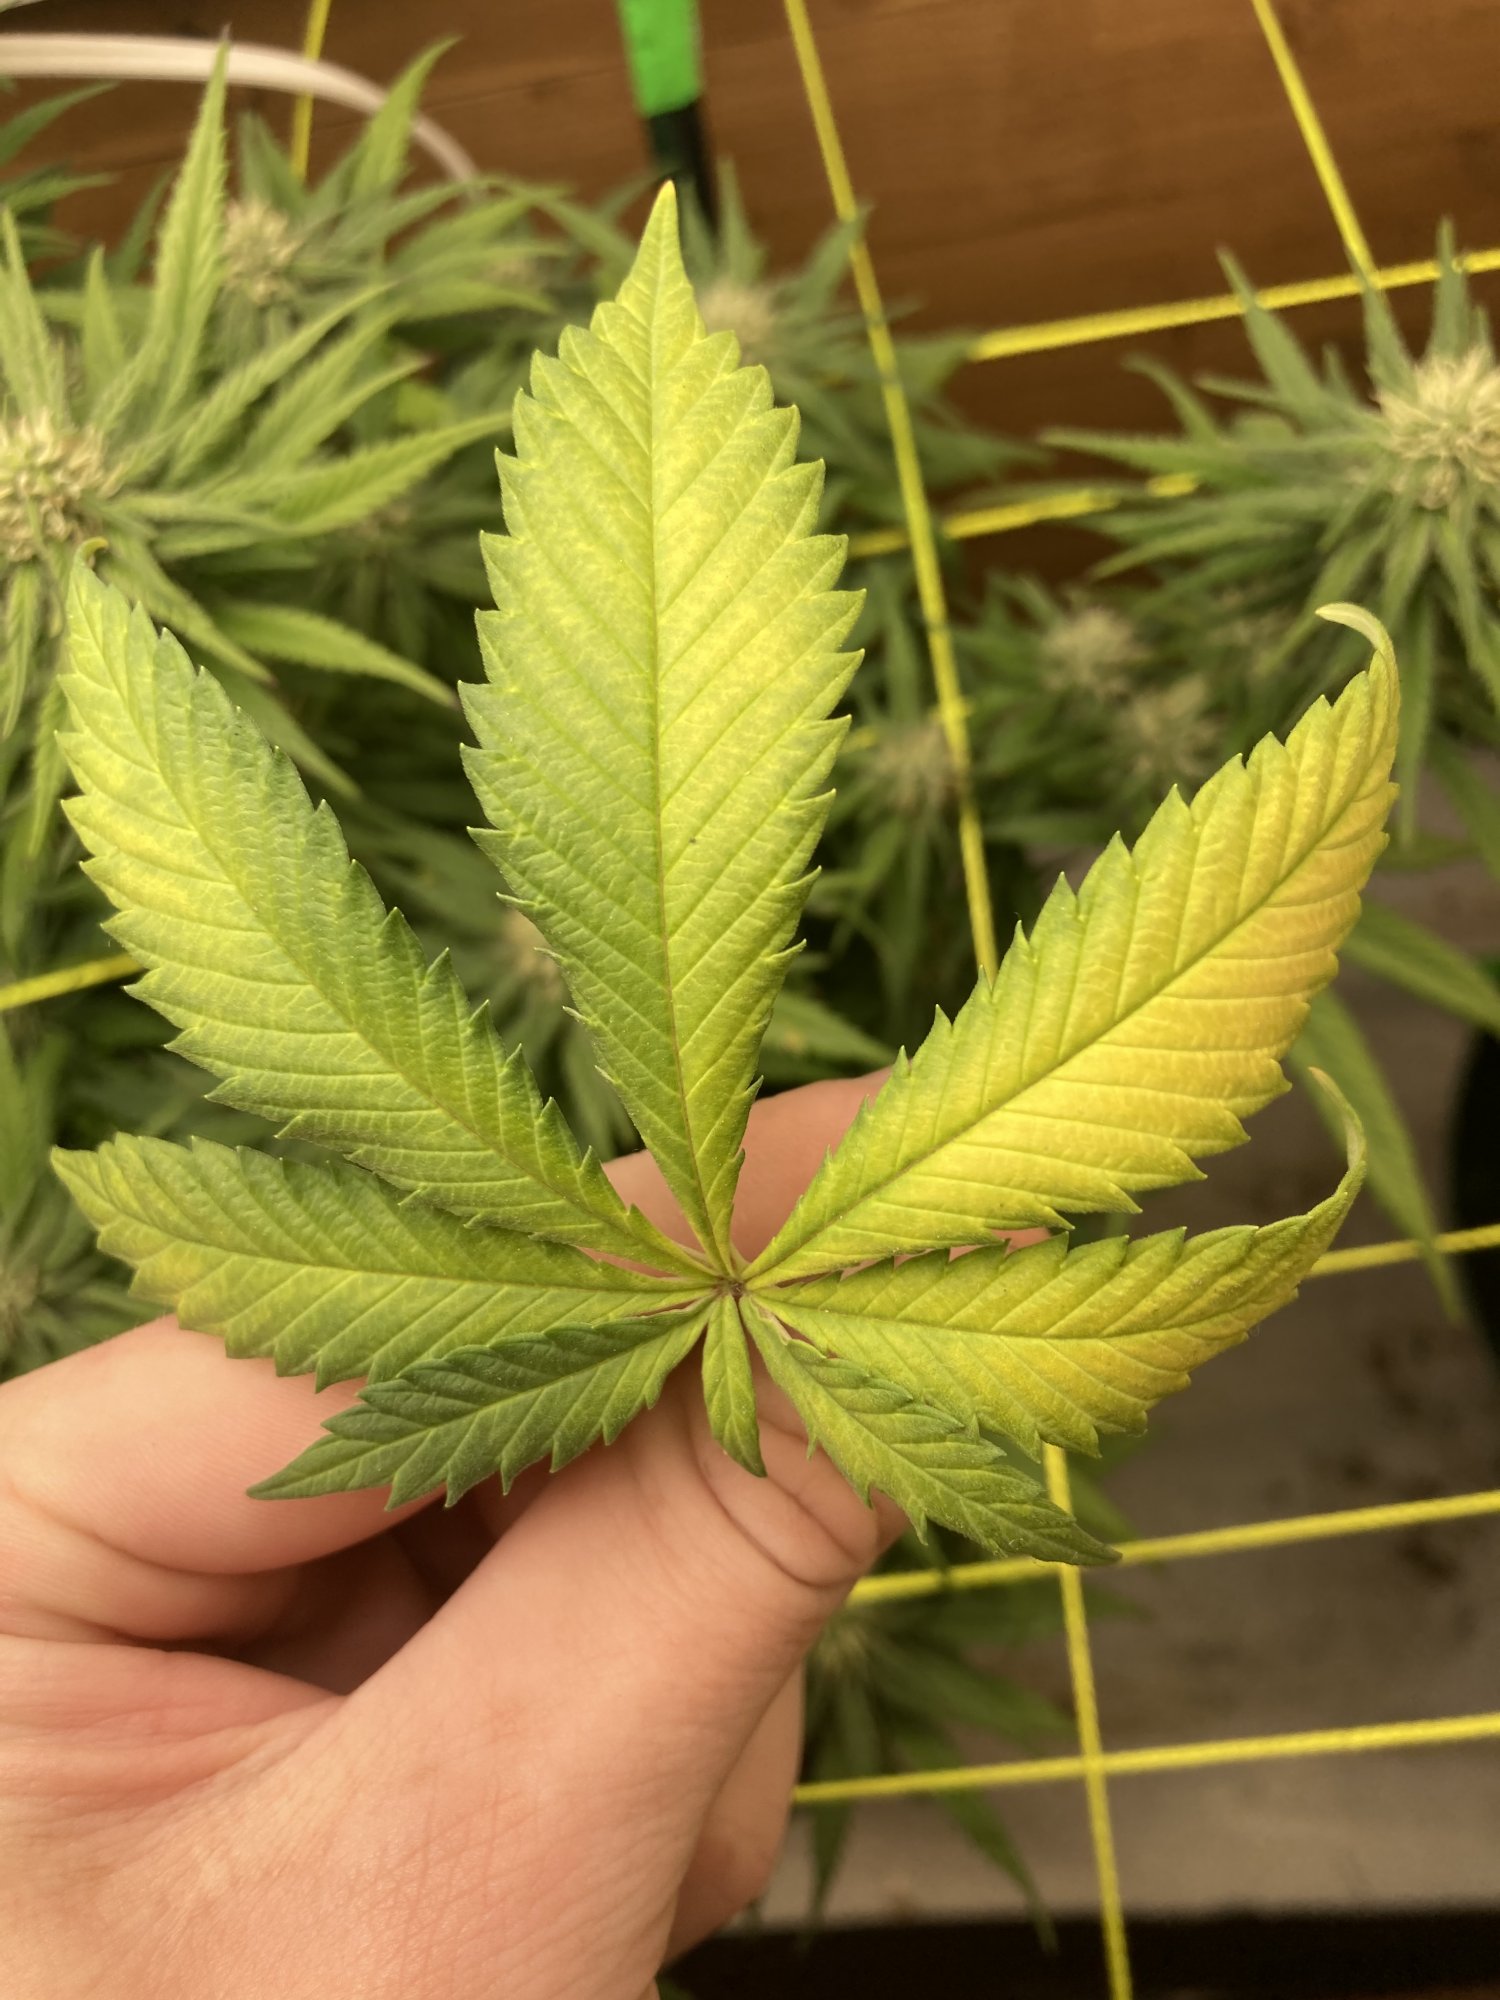 Help me pinpoint which deficiency problem